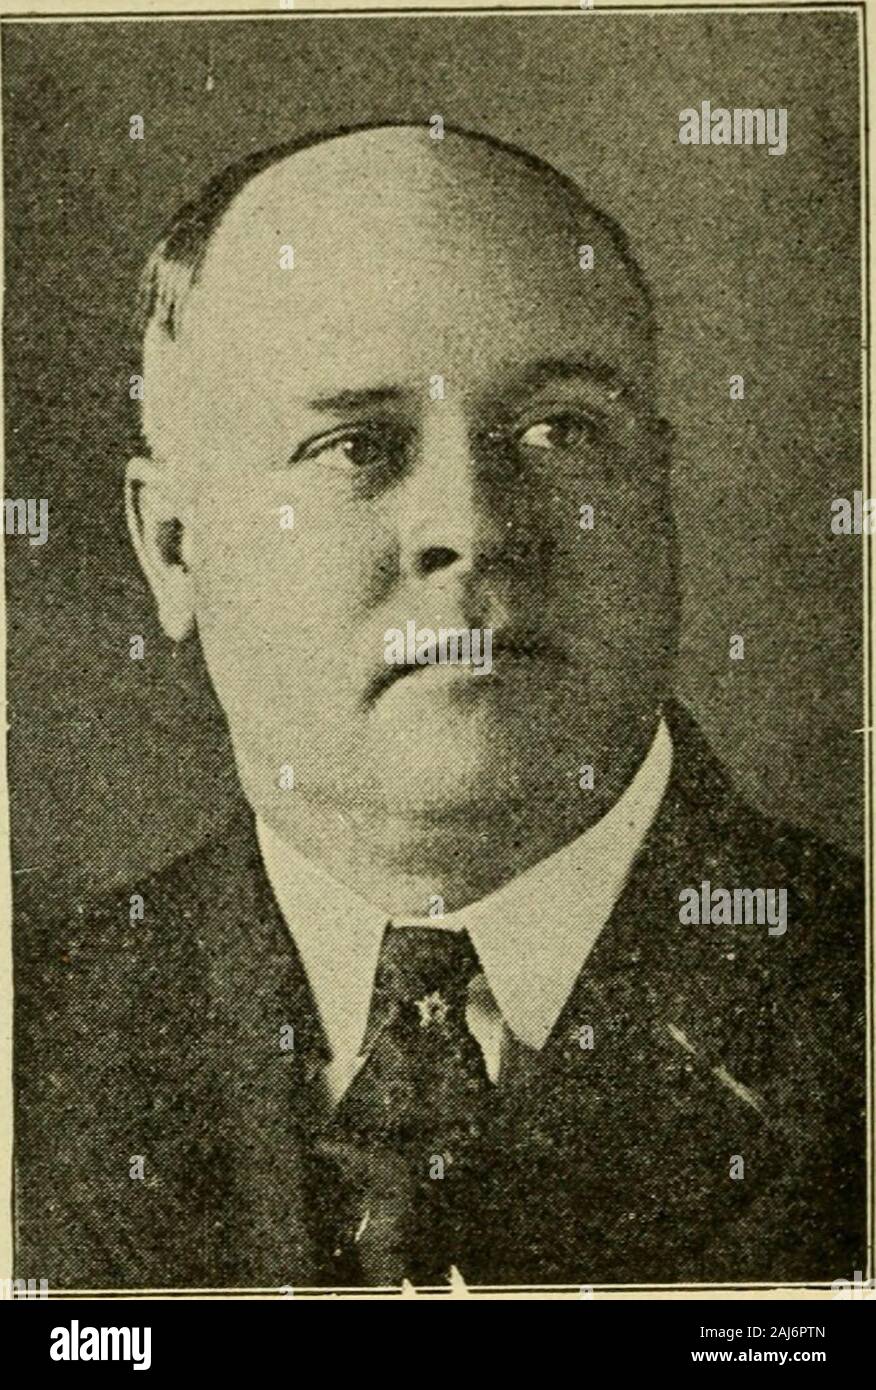 Public officials of Massachusetts . MclNTOSH, DAVID STORY, Quincy,Norfolk and Plymouth Senatorial District,Republican, Born: Quincy, August 1, 1885. Educated: Quincy Grammar and HighSchools. Business: Granite. Organizations: Clan McGregor, IroquoisClub, Quincy Civic Association, QuincyY. M. C. A., Masons, Granite City Club. Public office: House 1917, 1918; Senate1919, 1920. 63. McLANE, WALTER E., Fall River. Sec-ond Bristol Senatorial District, Republican. Born: Taunton, December 30, 1863. Educated: Grammar Schools. Business: Cotton broker. Organizations: Elks, Masons, Moose andmany clubs. Pub Stock Photo